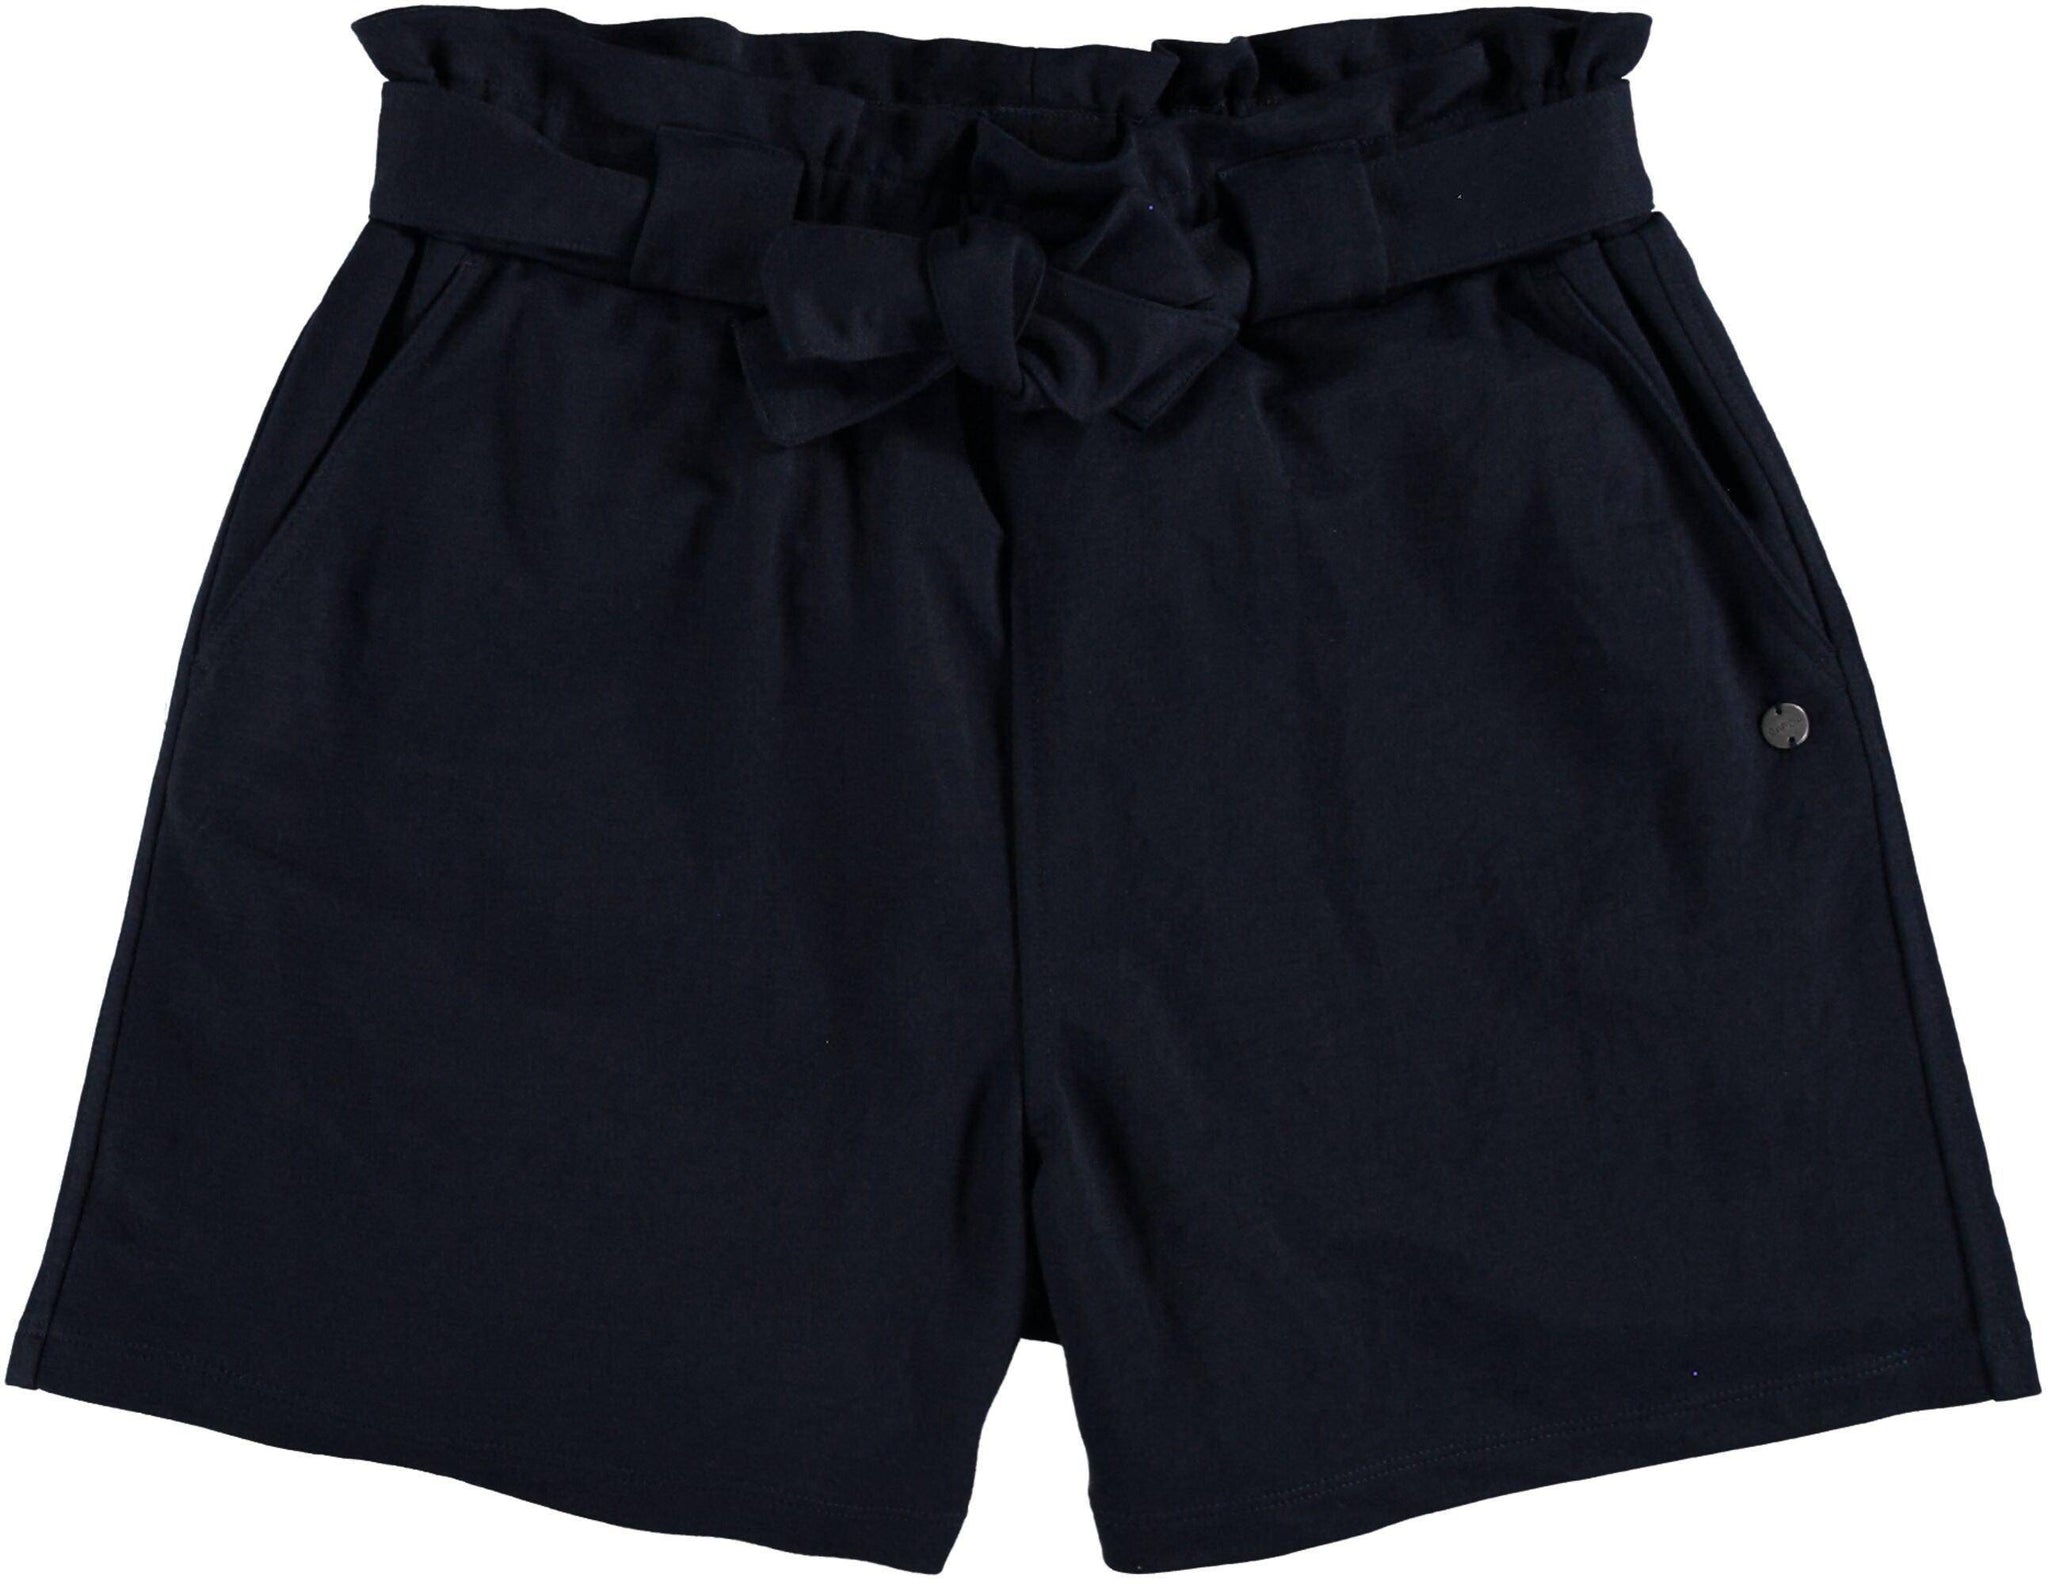 Dark blue Garcia Shorts - Your Style Your Story